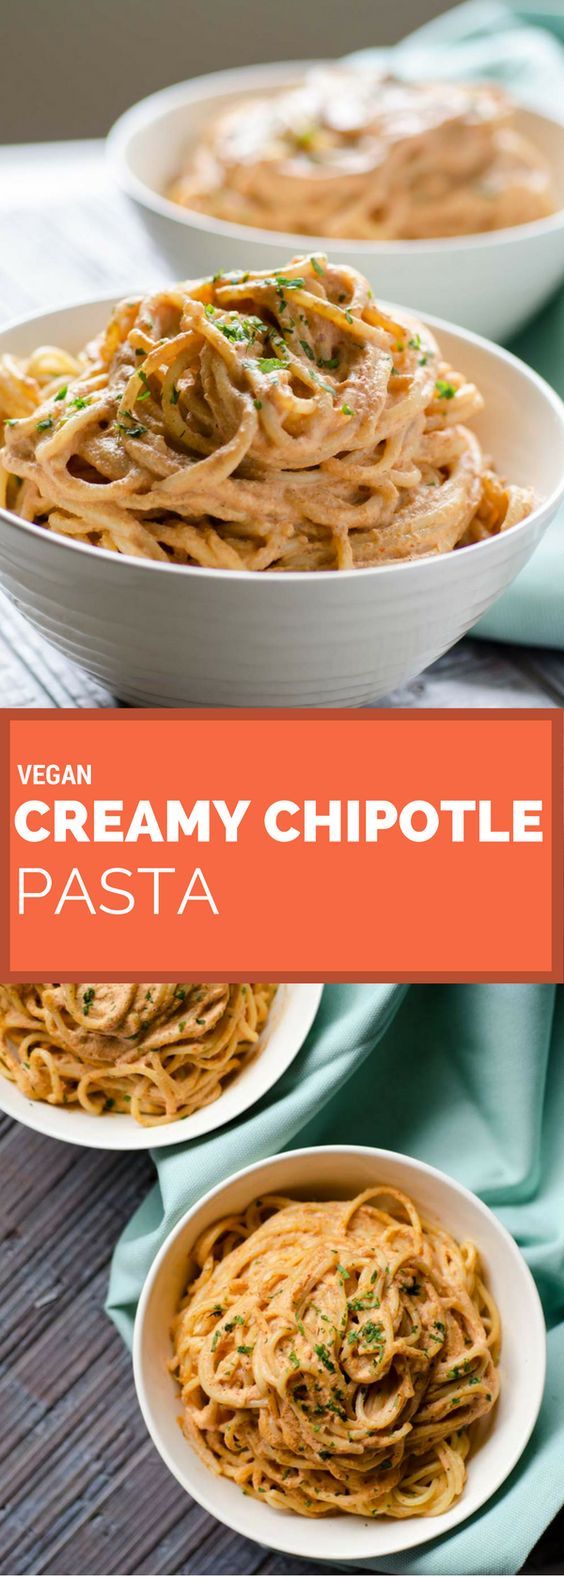 This vegan creamy chipotle pasta is so easy to make. The smokiness of the chipotle and the acidity of the lemon juice make it irresistible. A vegan Mexican recipe.